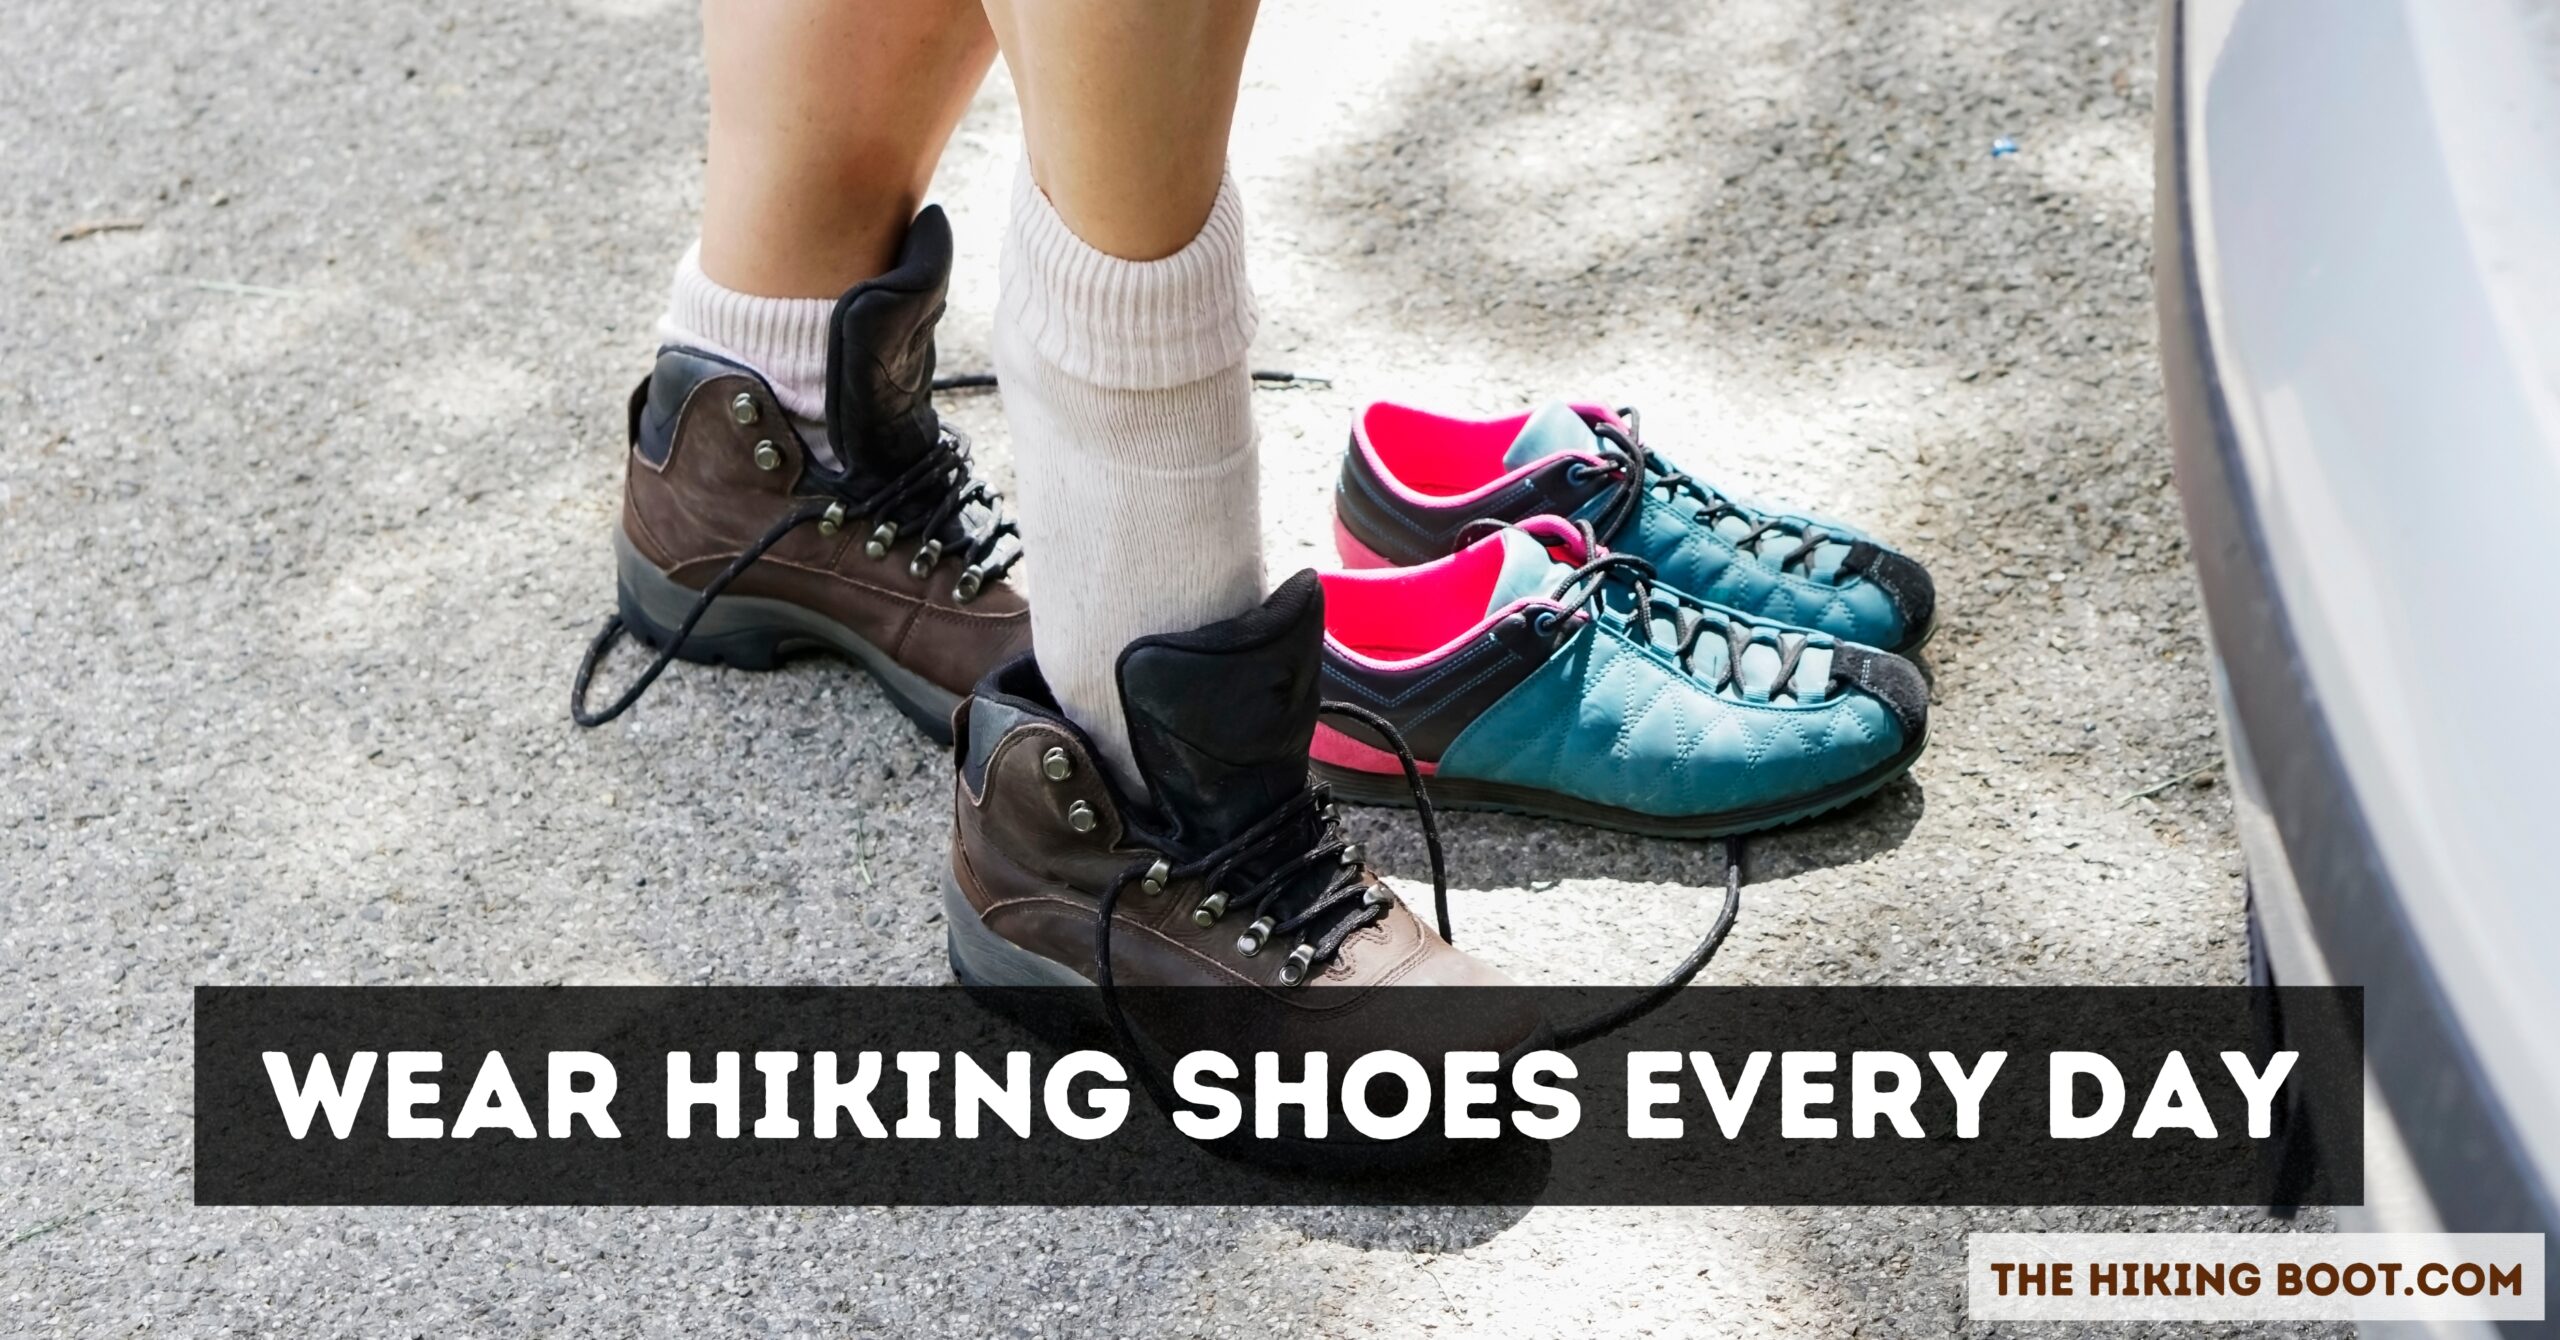 Can You Wear Hiking Shoes Every Day